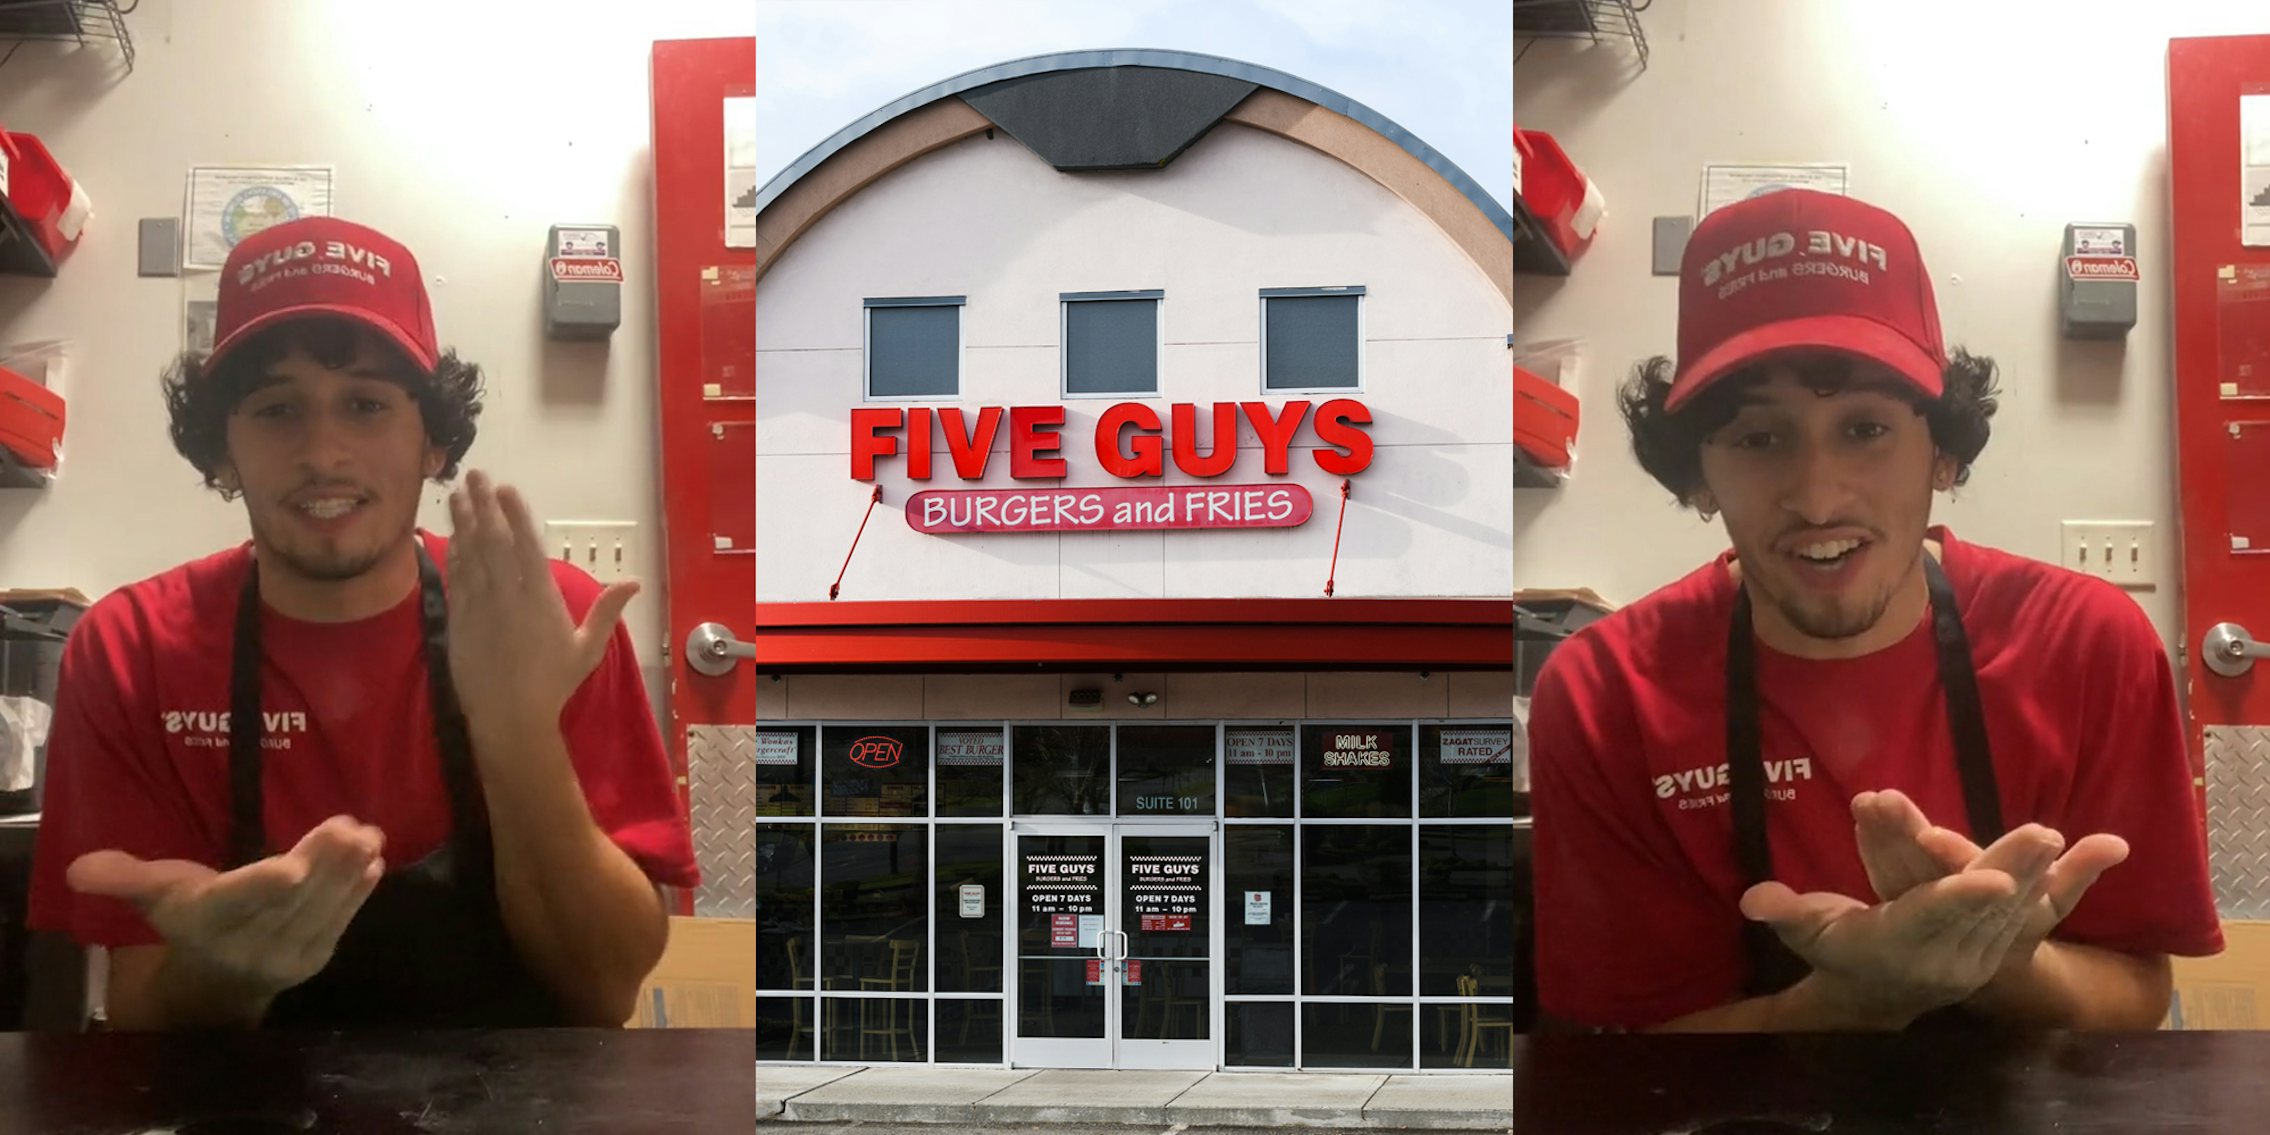 Five Guys employee speaking with hand about to hit other (l) Five Guys restaurant with sign (c) Five Guys employee speaking hand hitting palm of other hand (r)